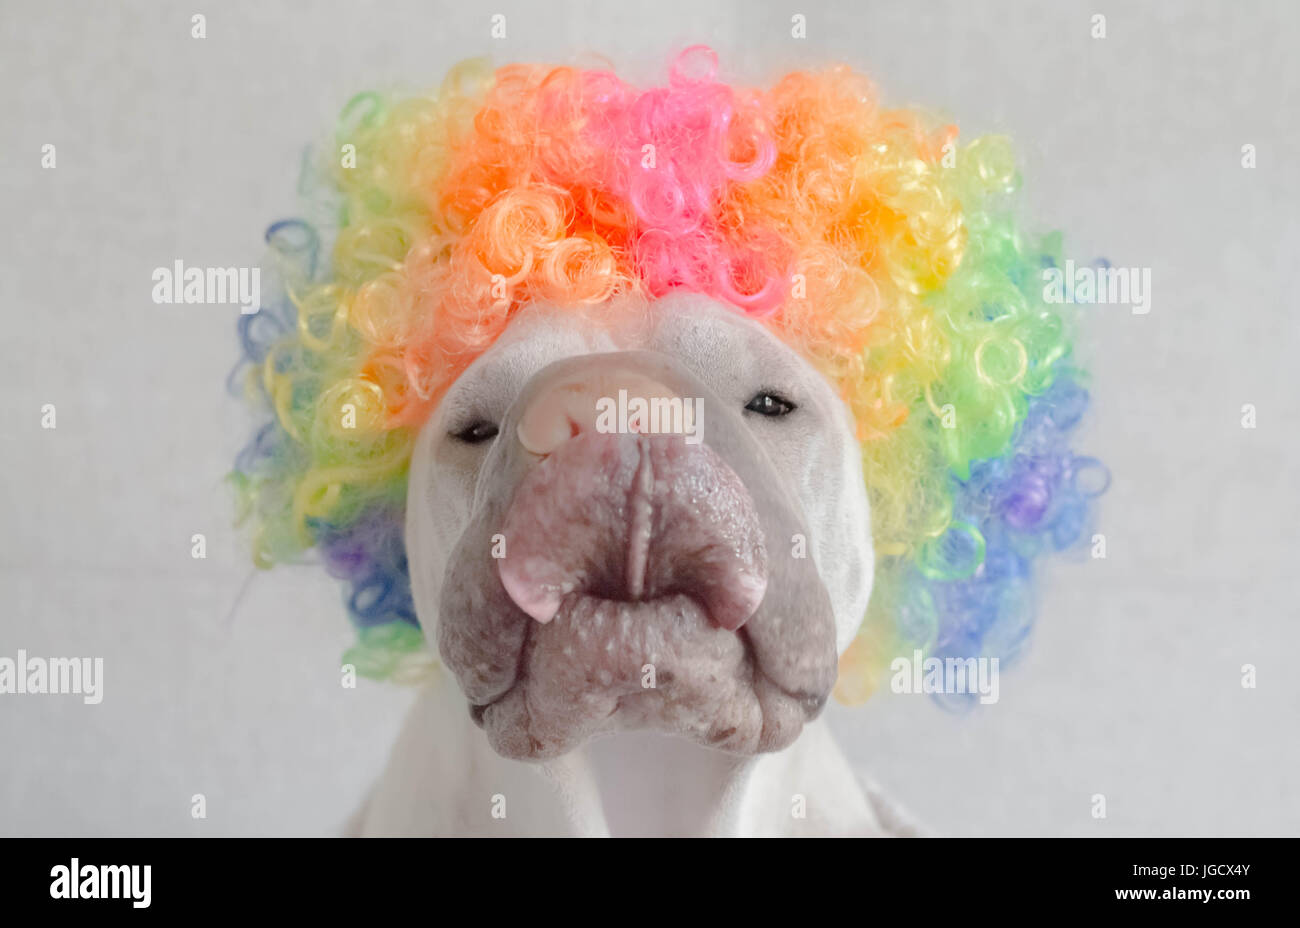 Shar pei dog wearing a multi-colored curly hair wig and licking his lips Stock Photo